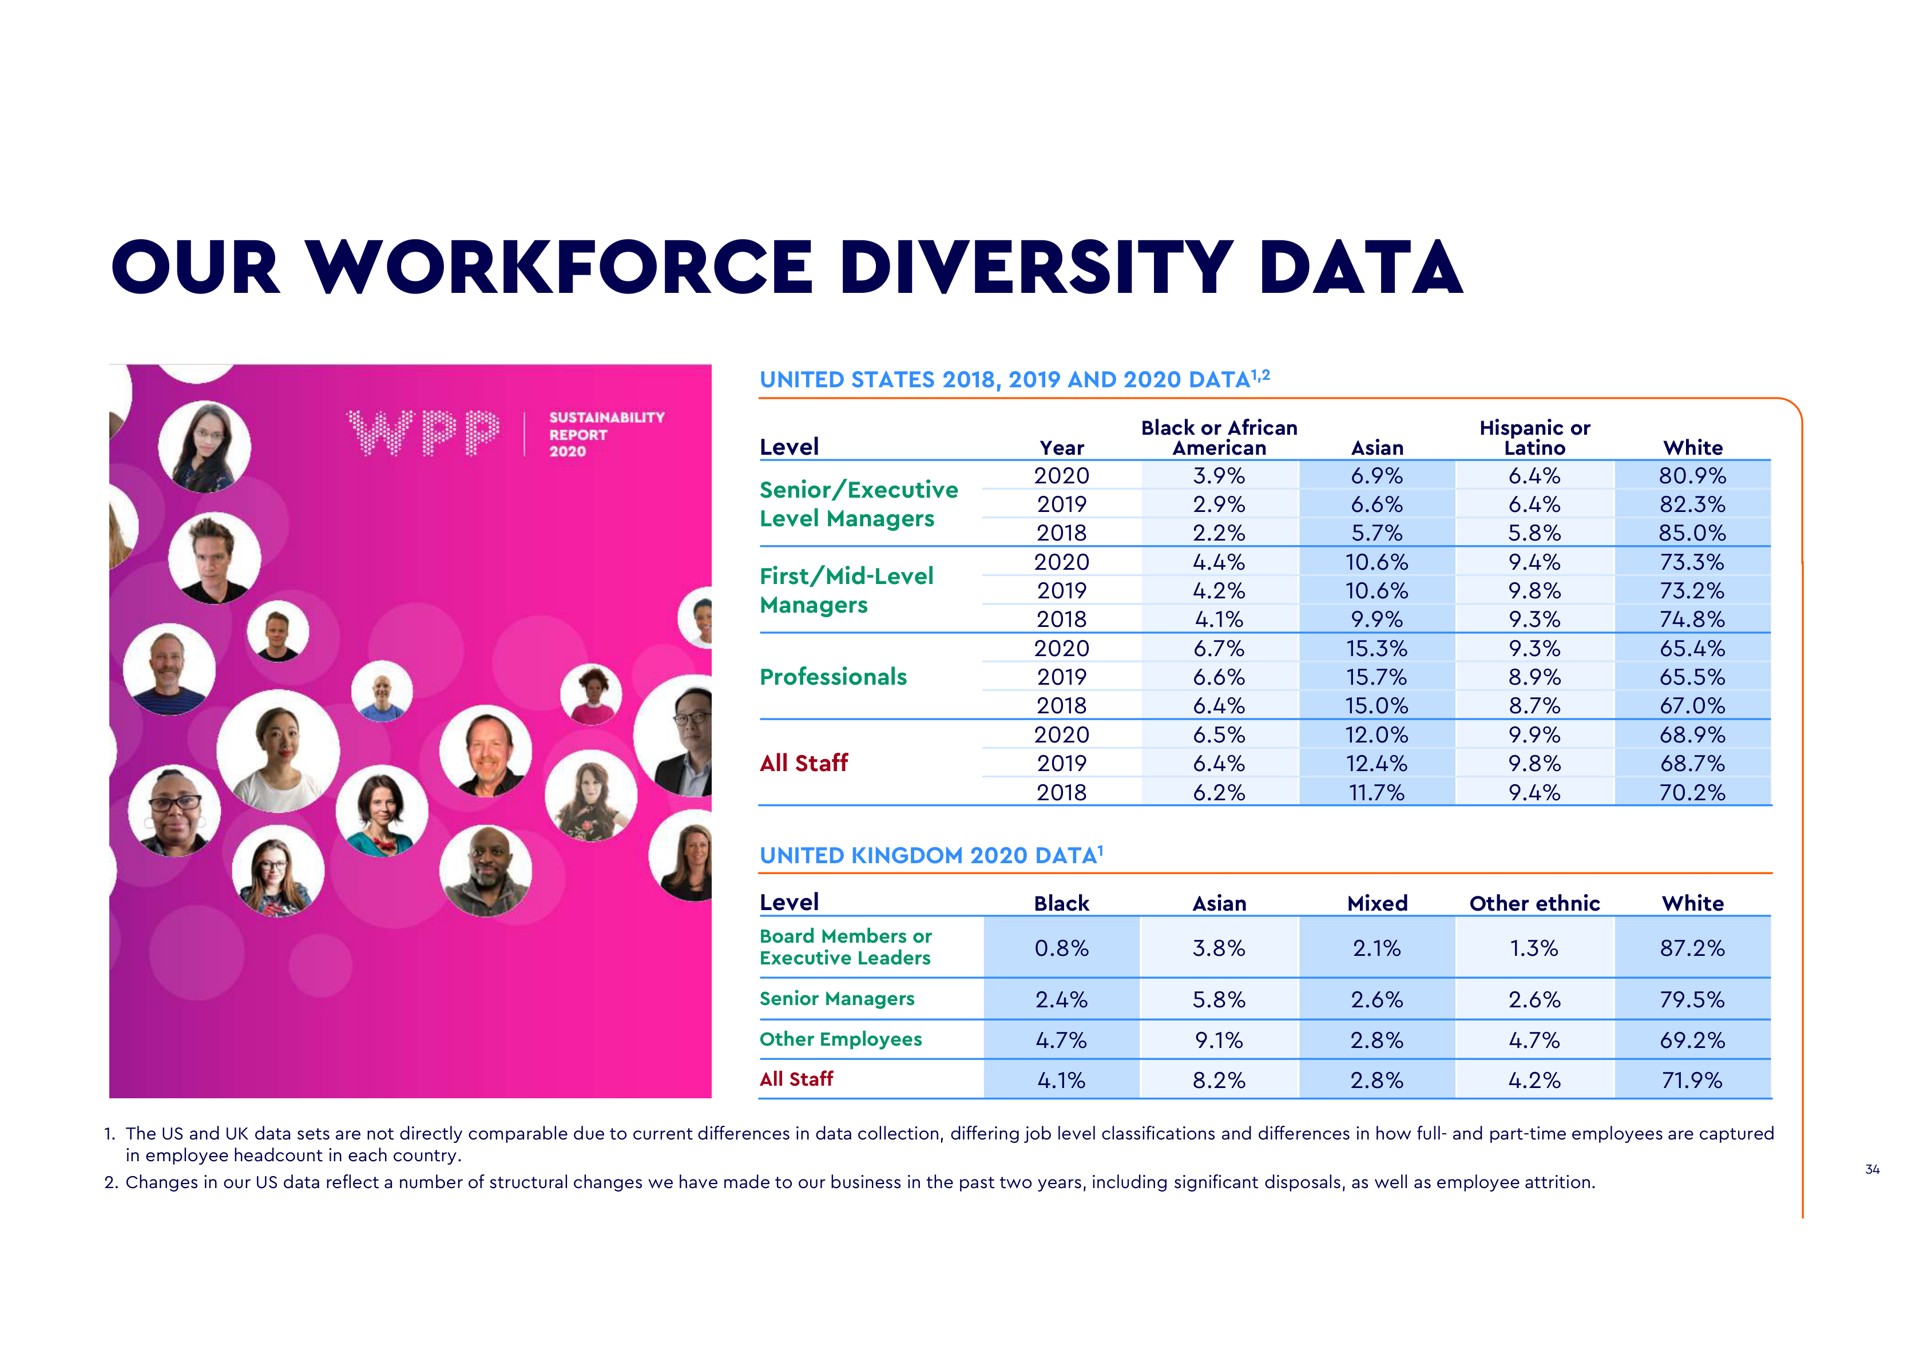 our diversity data ree united states and level professionals all staff year black or united kingdom level board members or senior managers other employees all staff black is mixed or other ethnic a white white the us and sets are not directly comparable due to current differences in collection differing job level classifications and differences in how full and part time employees are captured in employee in each country changes in us reflect a number of structural changes we have made to business in the past two years including significant disposals as well as employee attrition | WPP